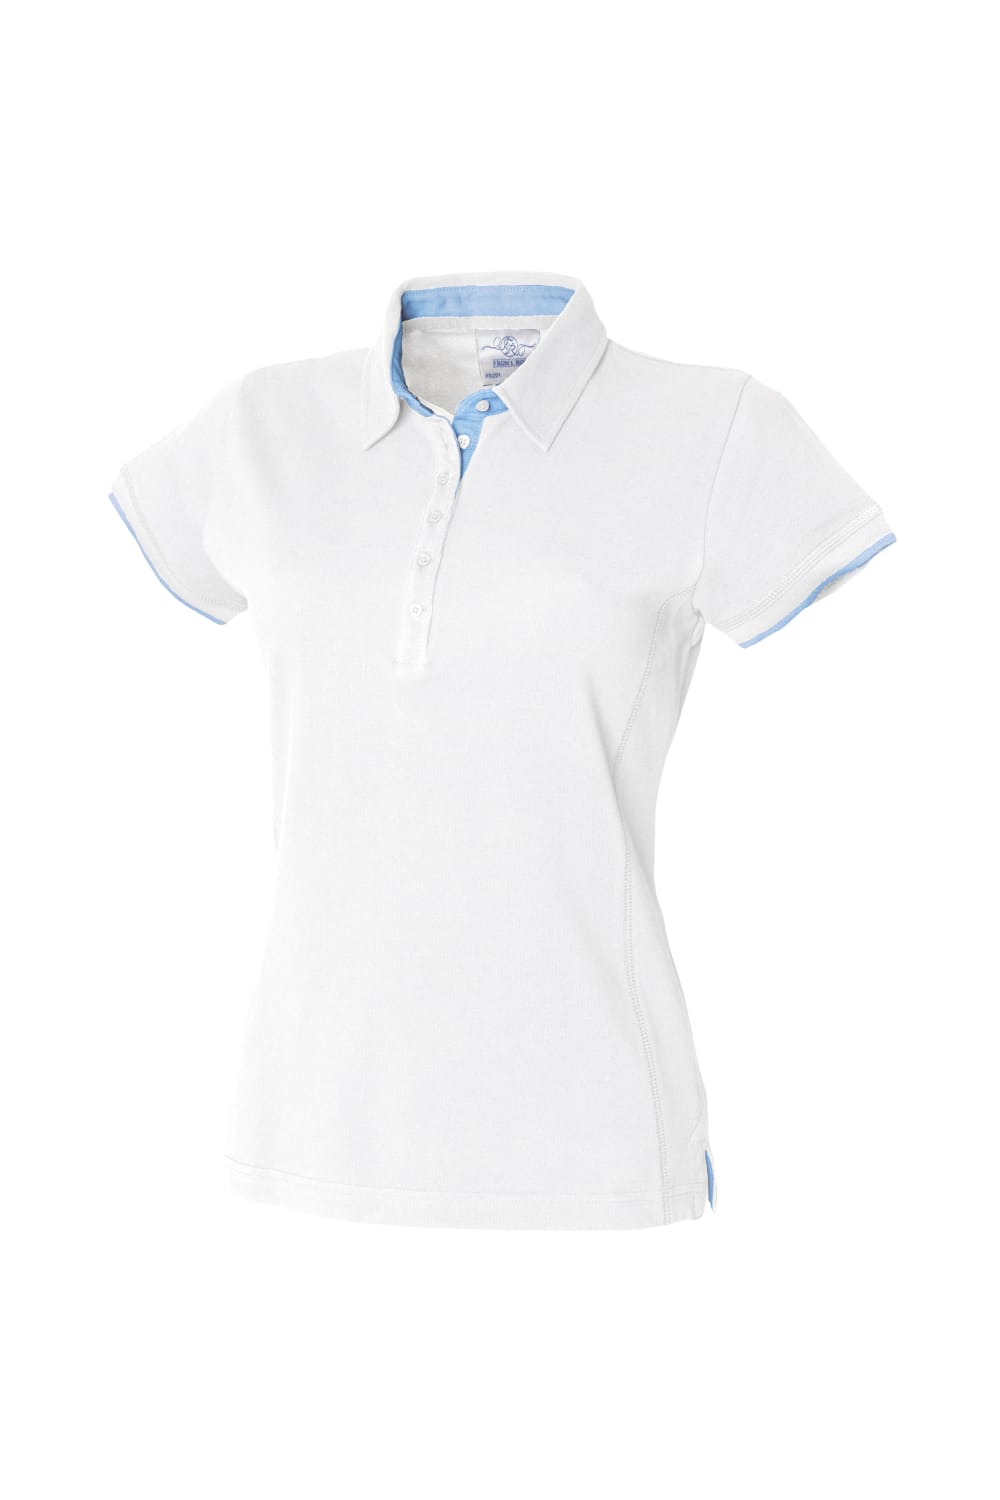 Front Row Womens/Ladies Contrast Pique Polo Shirt (White/ Sky Blue)